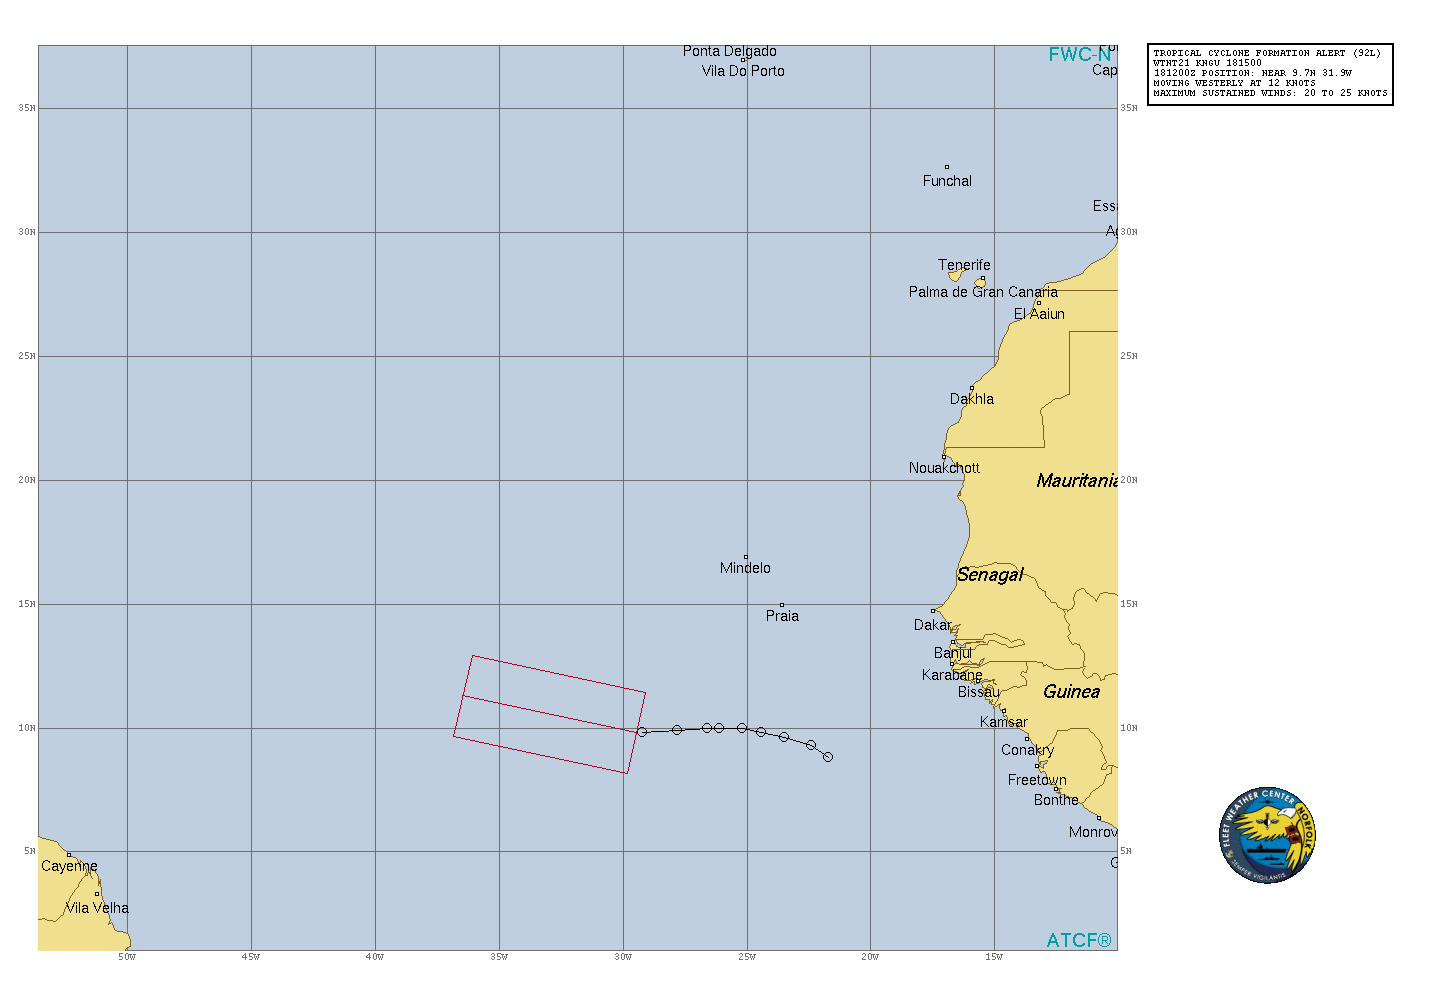 WTNT21 KNGU 181500 SUBJ/TROPICAL CYCLONE FORMATION ALERT// RMKS/1. FORMATION OF A TROPICAL CYCLONE IS POSSIBLE WITHIN 100 NM RADIUS OF 9.7N AND 31.9W WITHIN THE NEXT 24 HOURS.  AVAILABLE DATA DOES NOT JUSTIFY ISSUANCE OF NUMBERED TROPICAL  CYCLONE WARNINGS AT THIS TIME. WINDS IN THE AREA ARE ESTIMATED TO  BE 20 TO 25 KNOTS. METSAT IMAGERY AT 181200Z INDICATE THAT A SURFACE  CIRCULATION MAY BE FORMING NEAR 9.7N AND 31.9W. THE SYSTEM IS  MOVING AT 12 KNOTS AT A BEARING OF 270 DEGREES. 2. A BROAD AREA OF SHOWERS AND THUNDERSTORMS, LOCATED SEVERAL  HUNDRED MILES SOUTHWEST OF THE CABO VERDE ISLANDS, CONTINUES TO SHOW SIGNS ORGANIZATION. ENVIRONMENTAL CONDITIONS APPEAR CONDUCIVE FOR ADDITIONAL DEVELOPMENT AND A TROPICAL DEPRESSION IS LIKELY TO FORM DURING THE NEXT 24 HOURS. THIS DISTURBANCE IS EXPECTED TO MOVE GENERALLY WESTWARD OVER THE CENTRAL TROPICAL ATLANTIC DURING THE  NEXT SEVERAL DAYS.  3. THIS ALERT WILL BE REISSUED, SUPERSEDED BY POTENTIAL TROPICAL CYCLONE ADVISORY, UPGRADED TO WARNING, OR CANCELLED BY 191500.